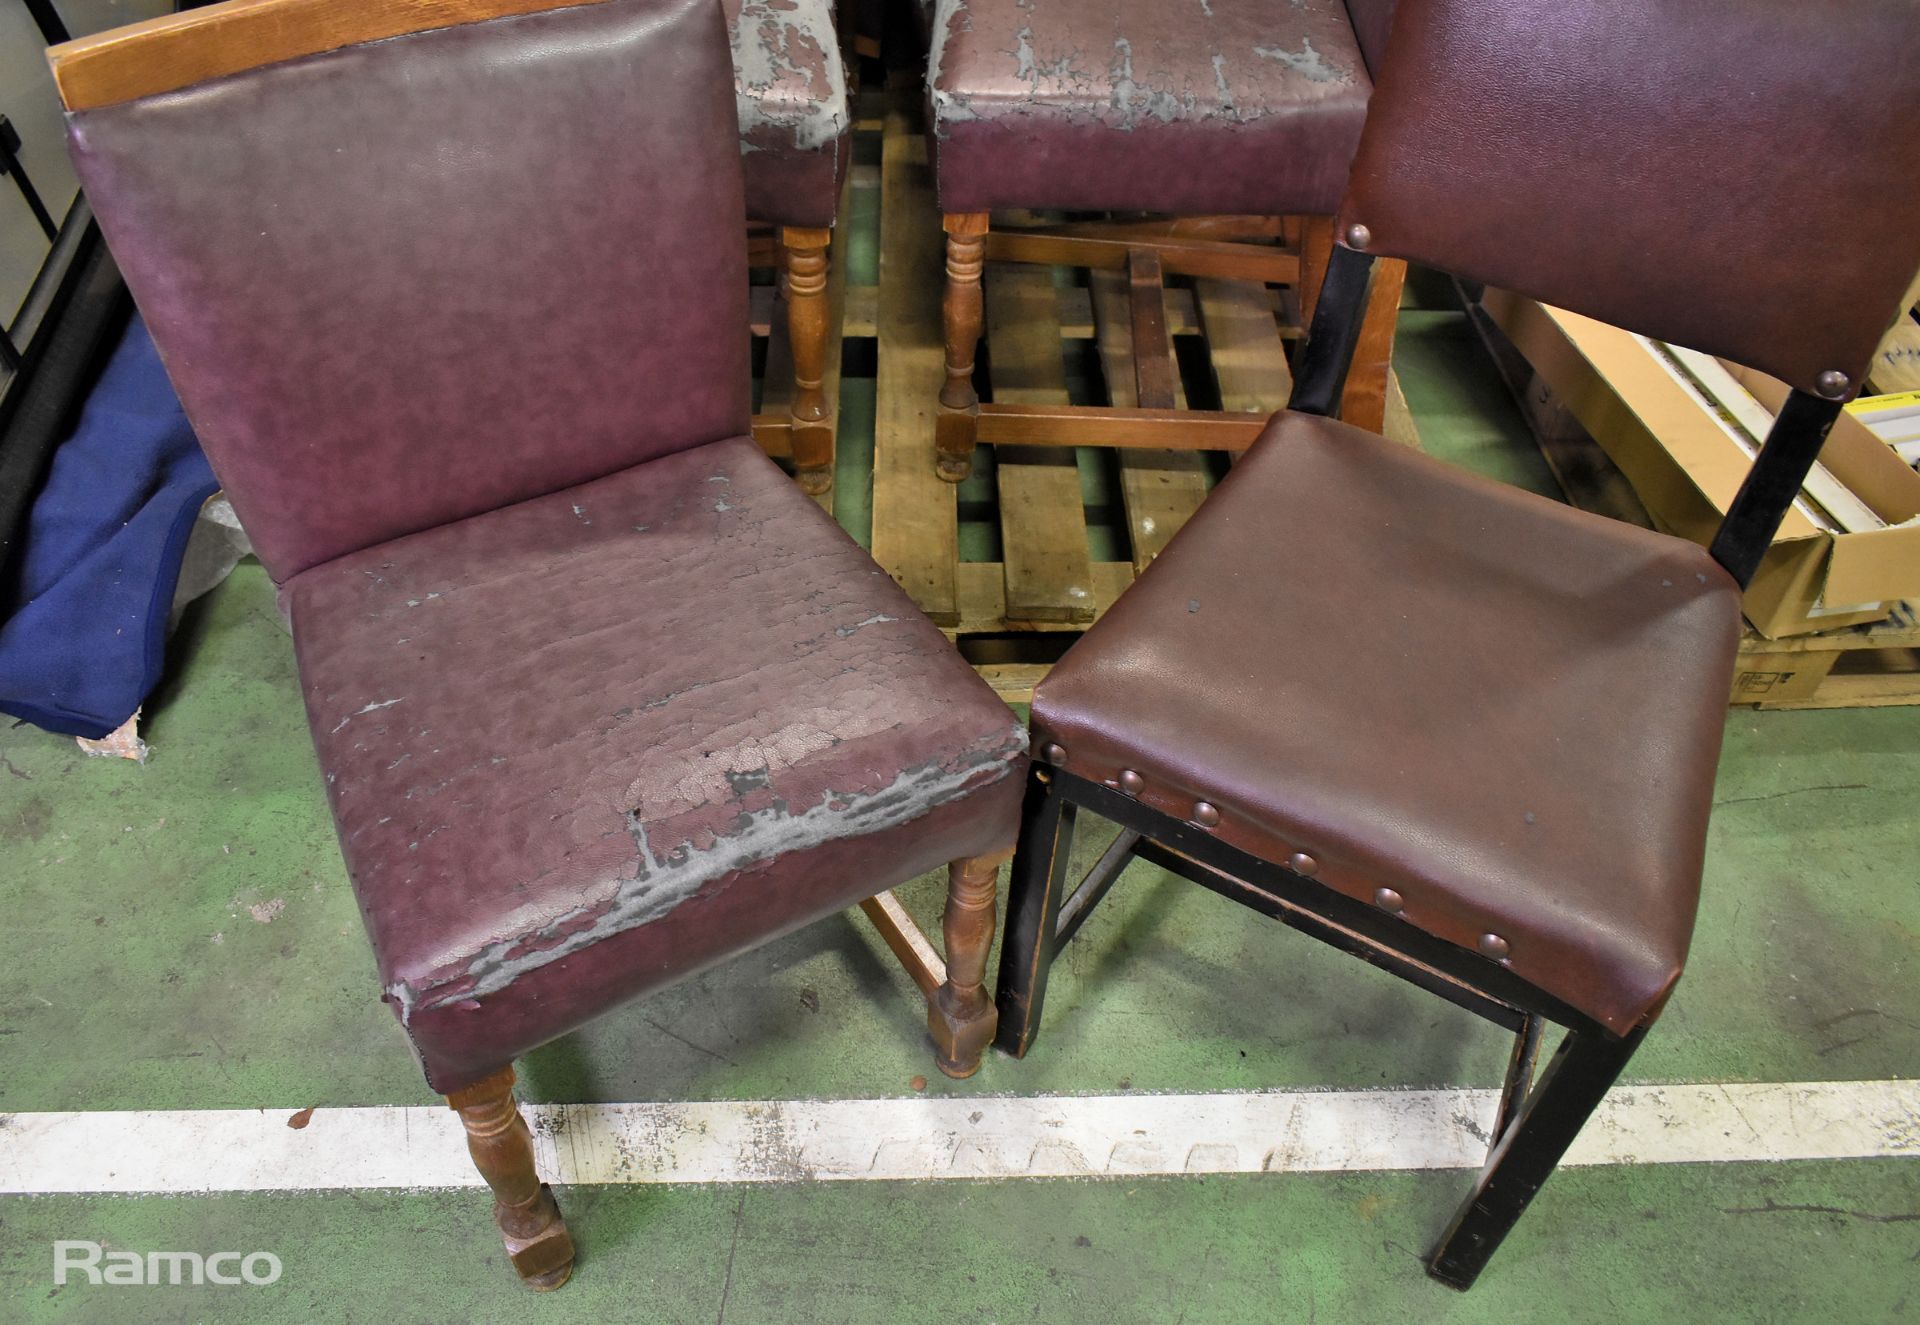 8x Leather wooden chairs - padding worn - Image 3 of 5